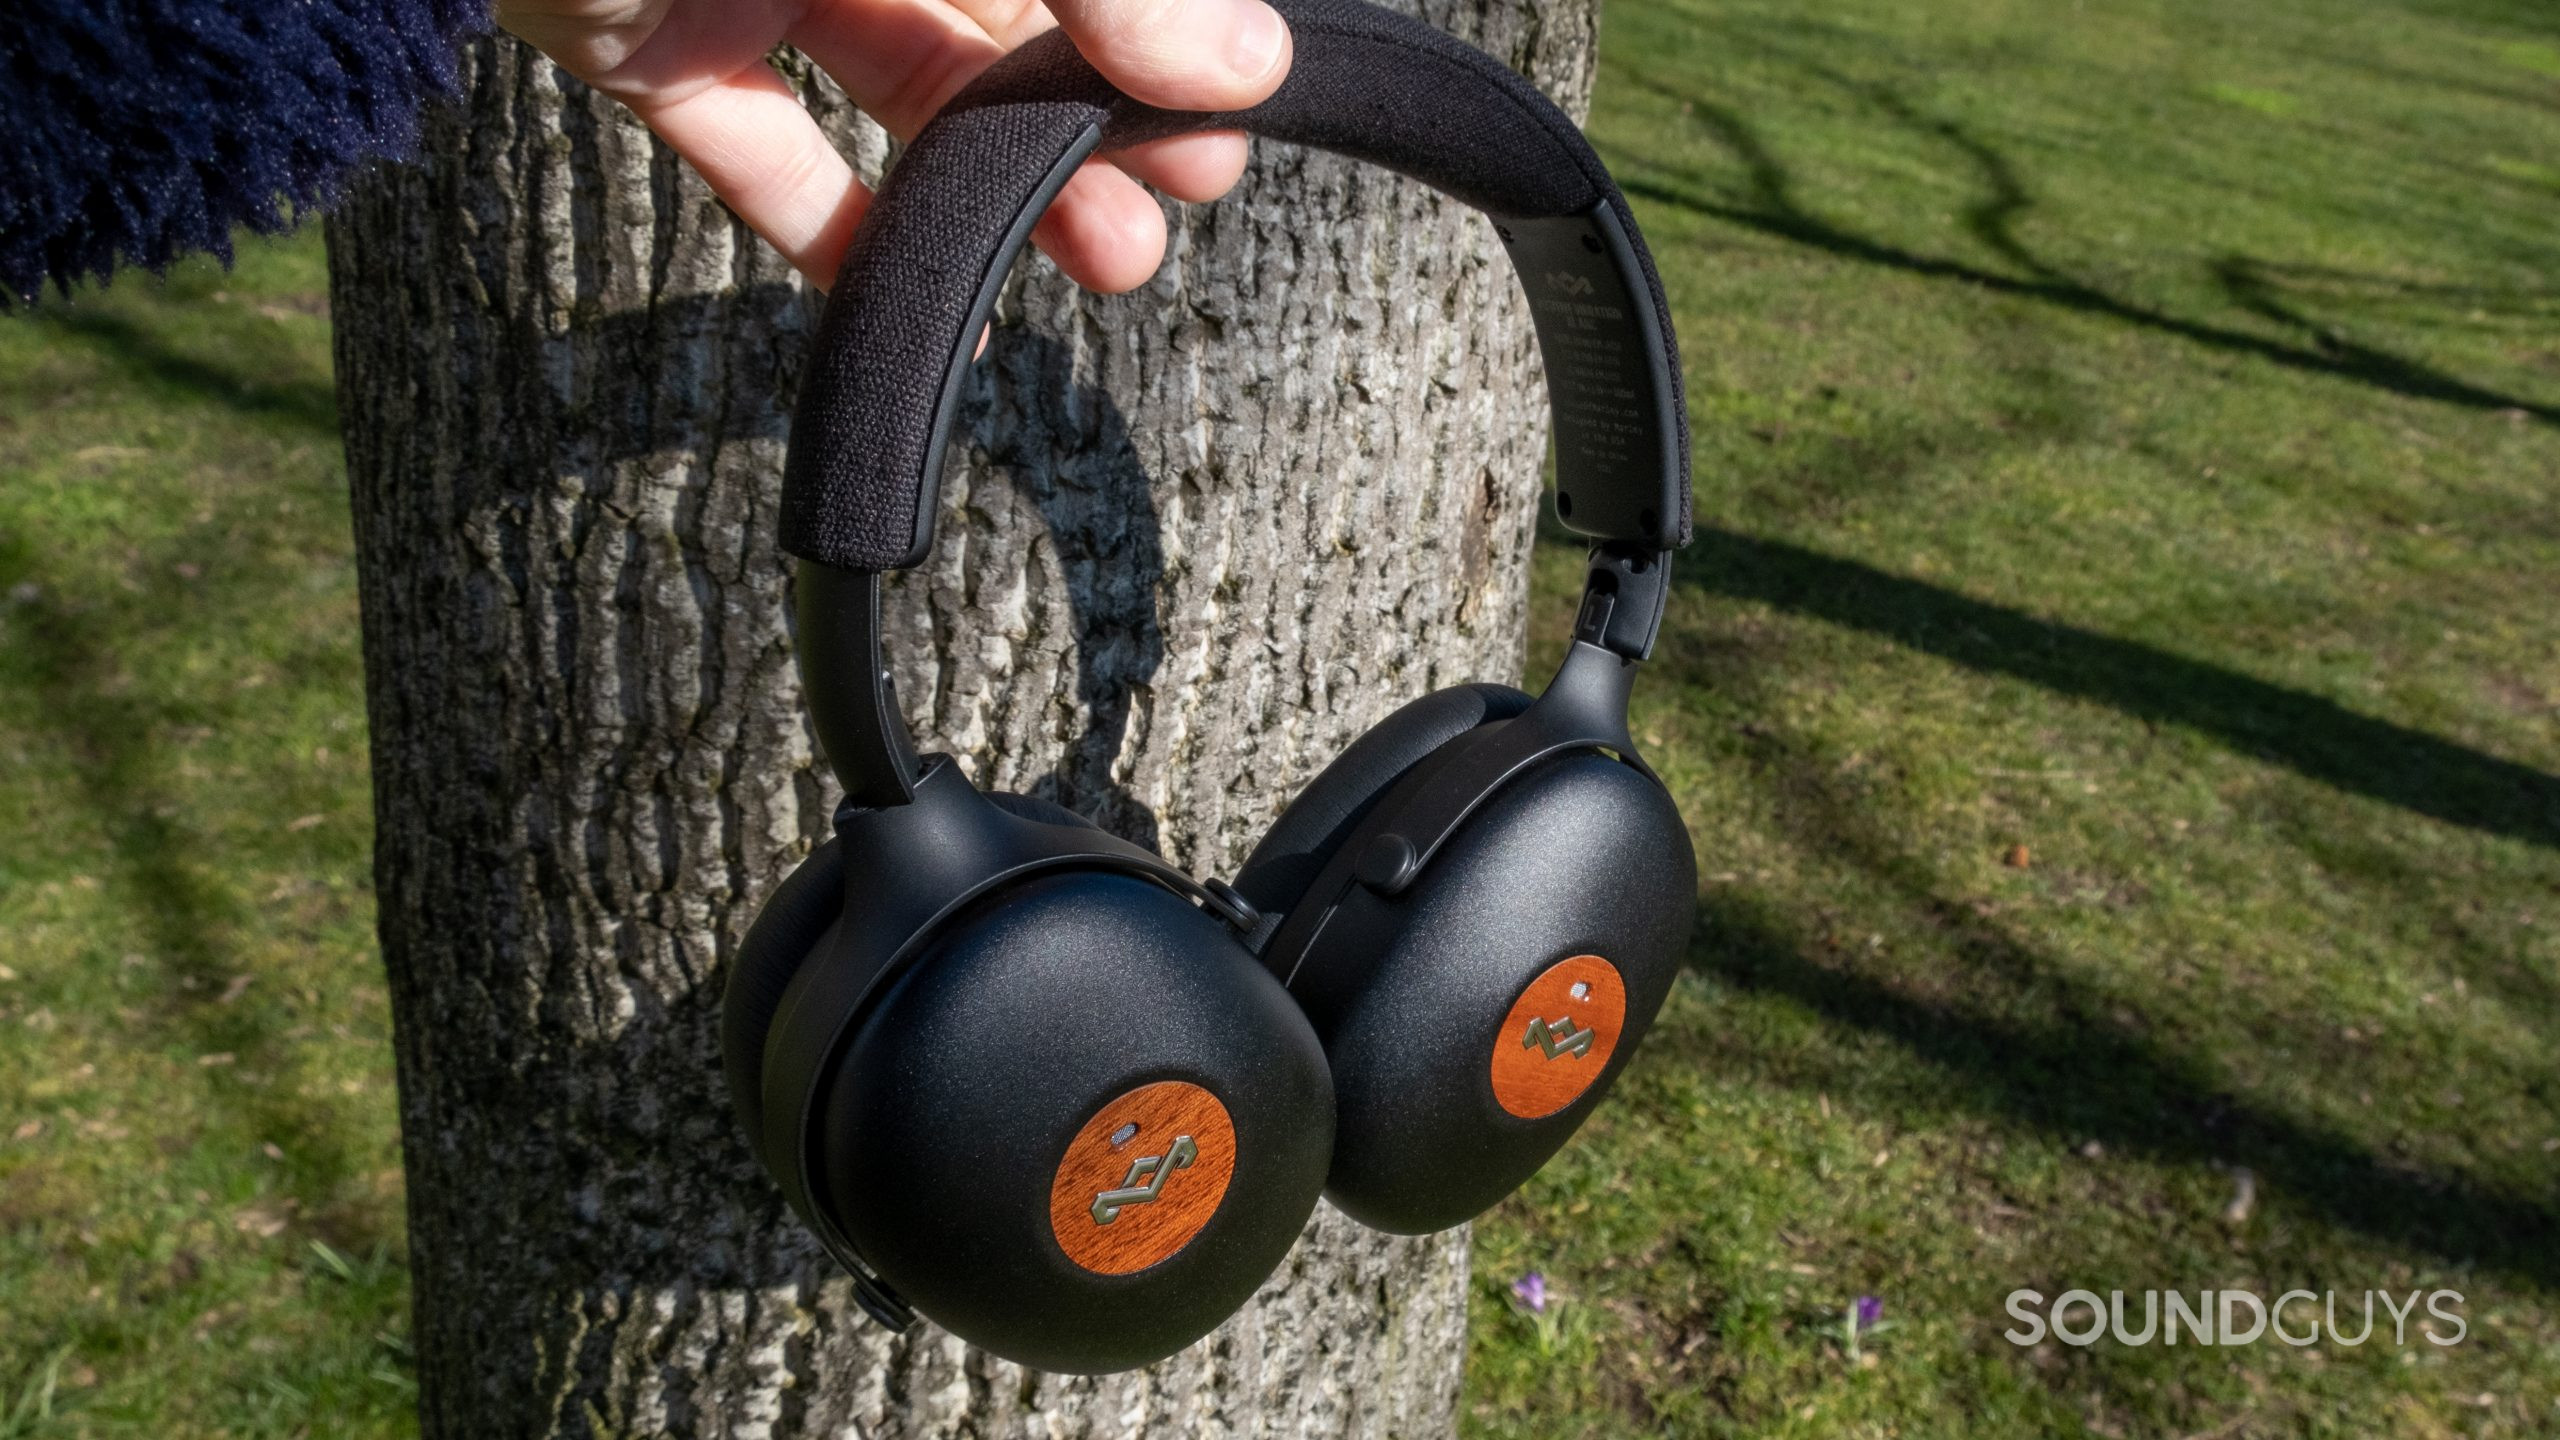 The House of Marley Positive Vibration XL ANC held up in front of a tree and grass with the ear cups rotated flat.